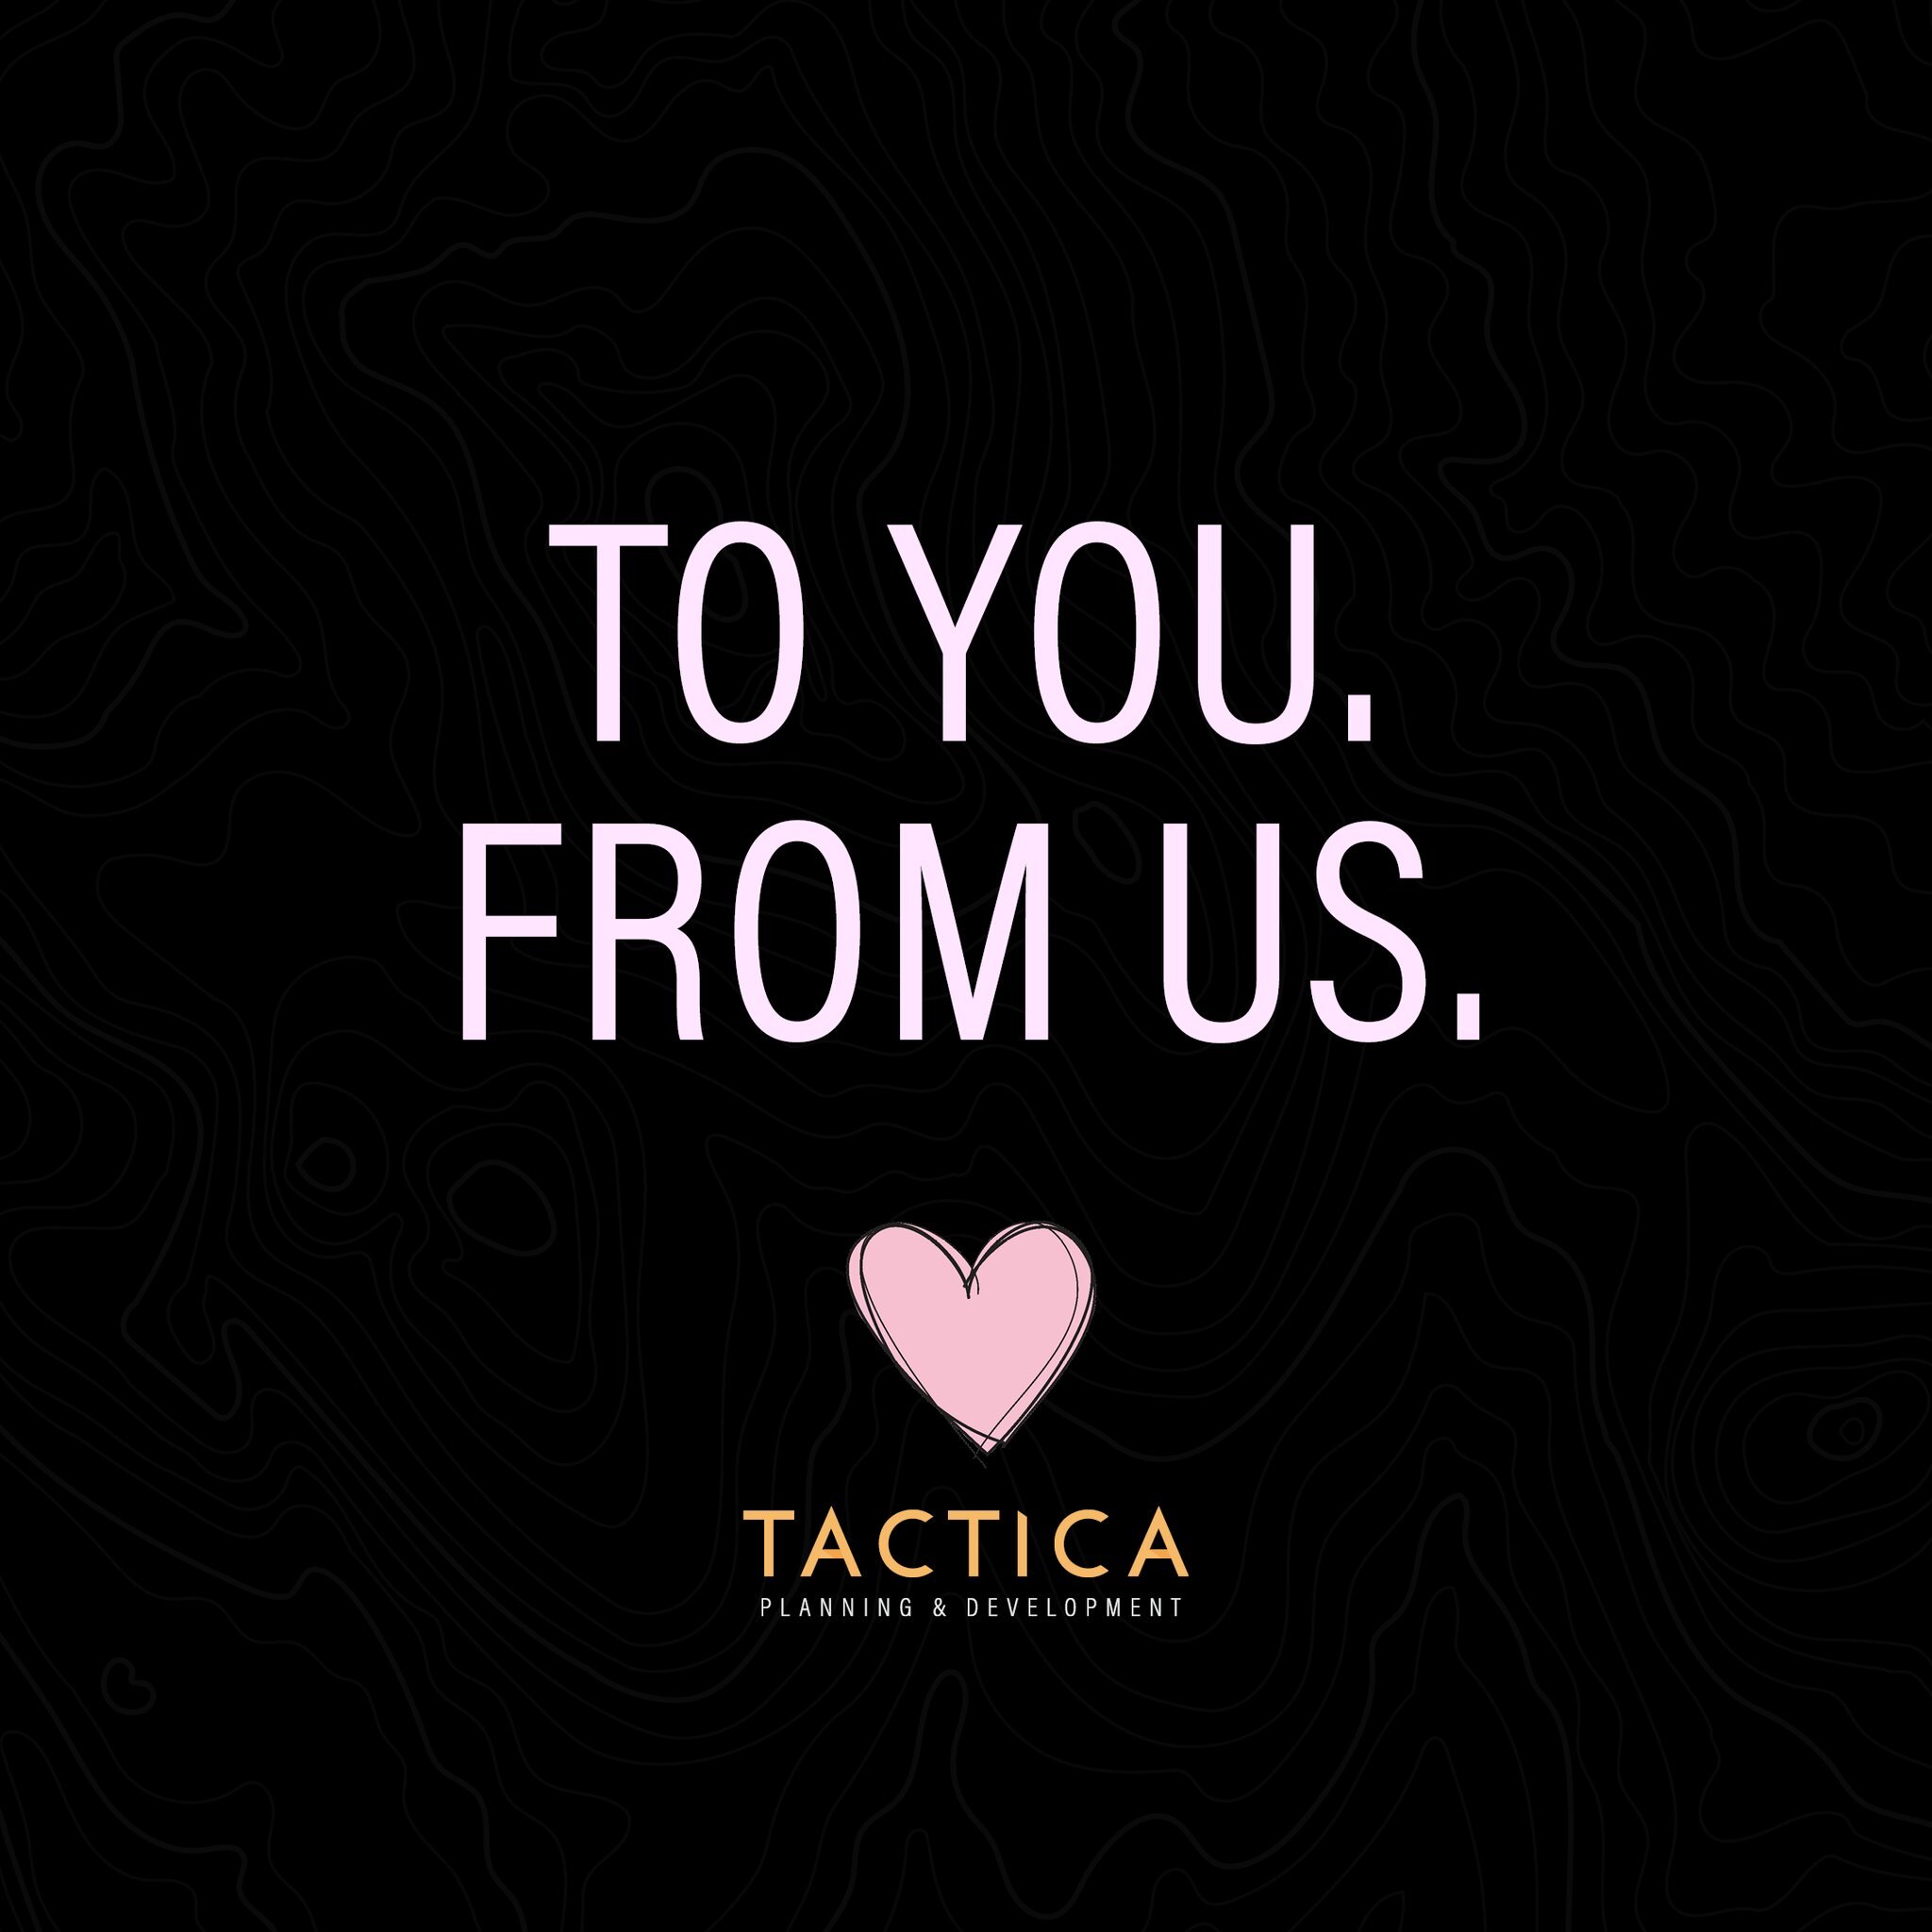 Give yourself a hug for being awesome today. Happy 
Valentine's day x
.
#tacticaplan #planning #goldcoast #tacticaplanning&amp;development #townplanning #urbanplanning #development #goldcoastplanning #goldcoastdevelopment #urbanplanning #subdivision 